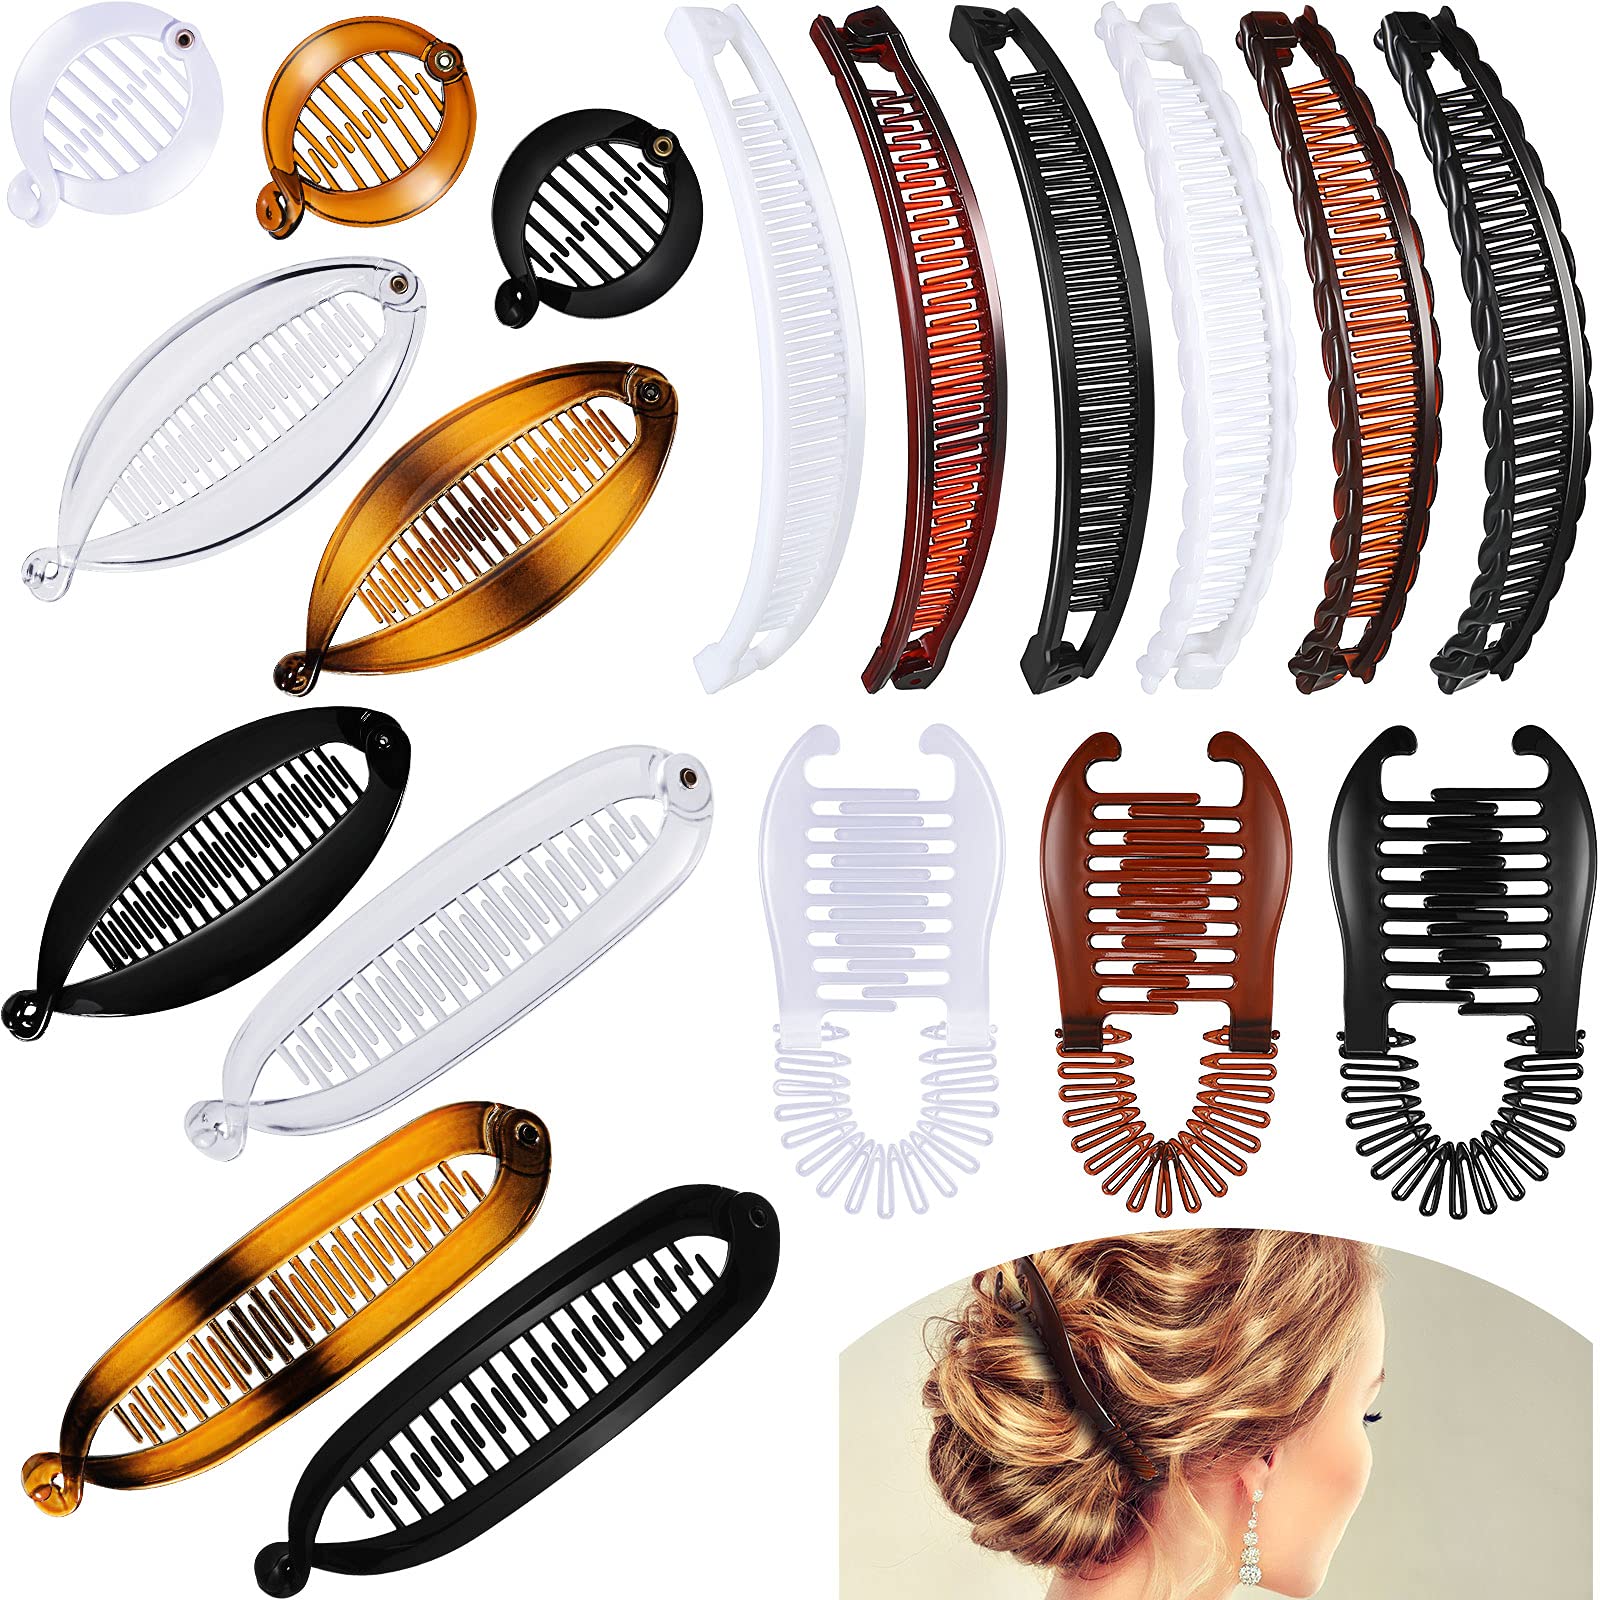 12 Pieces Banana Hair Clips, Classic Clincher Combs Large Double Comb  Banana Clip Fishtail Hair Clip Banana Ponytail Holder Clip for Women Girls,  4